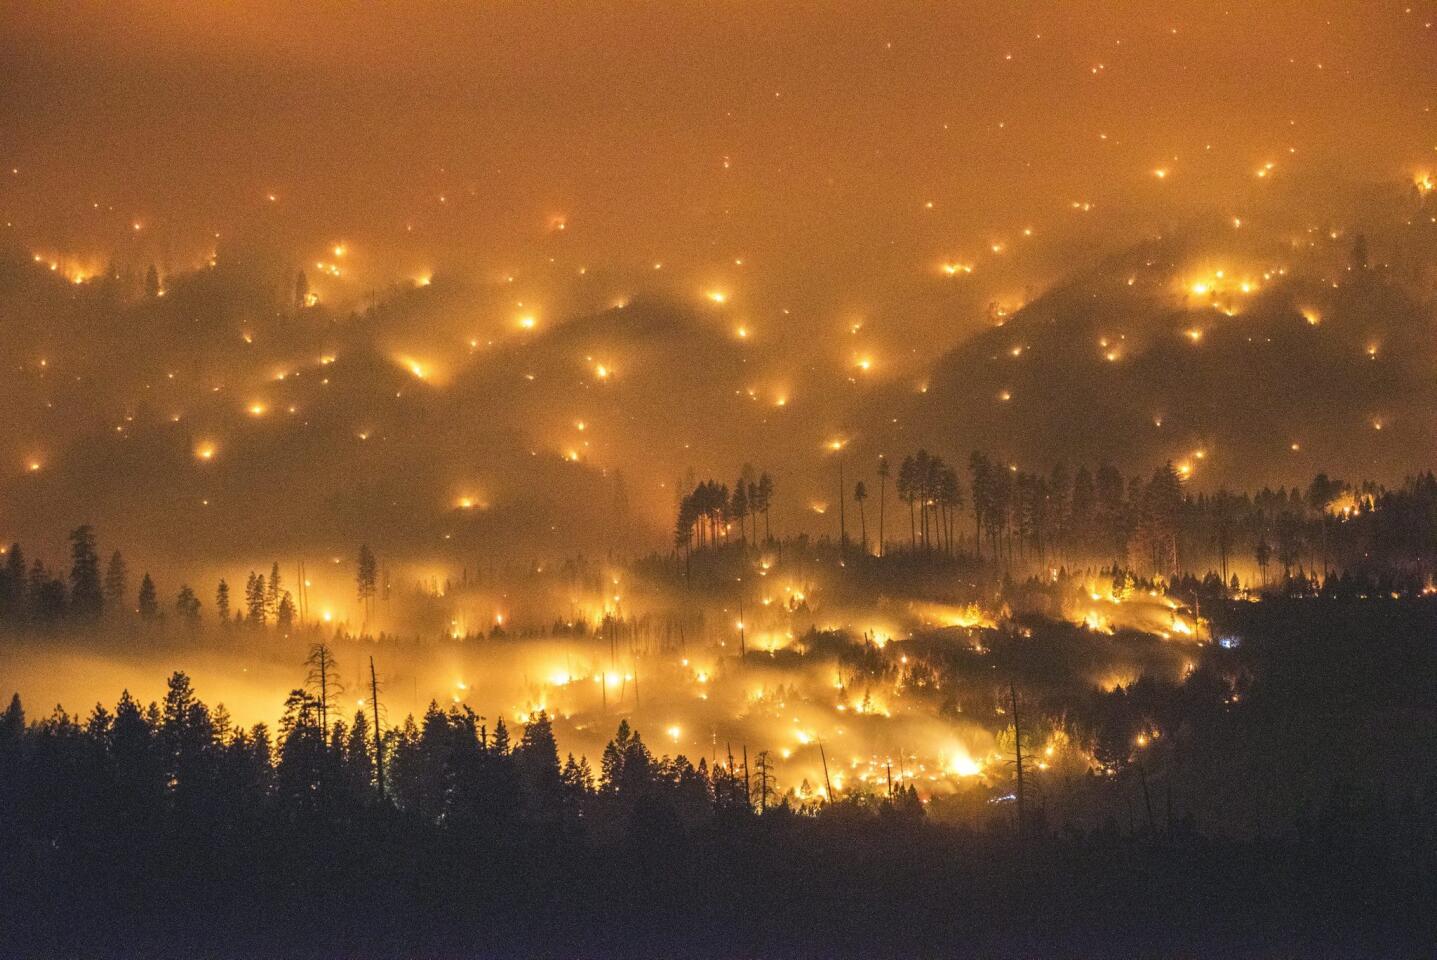 A long-exposure image shows the El Portal fire burning near Yosemite National Park on July 27.